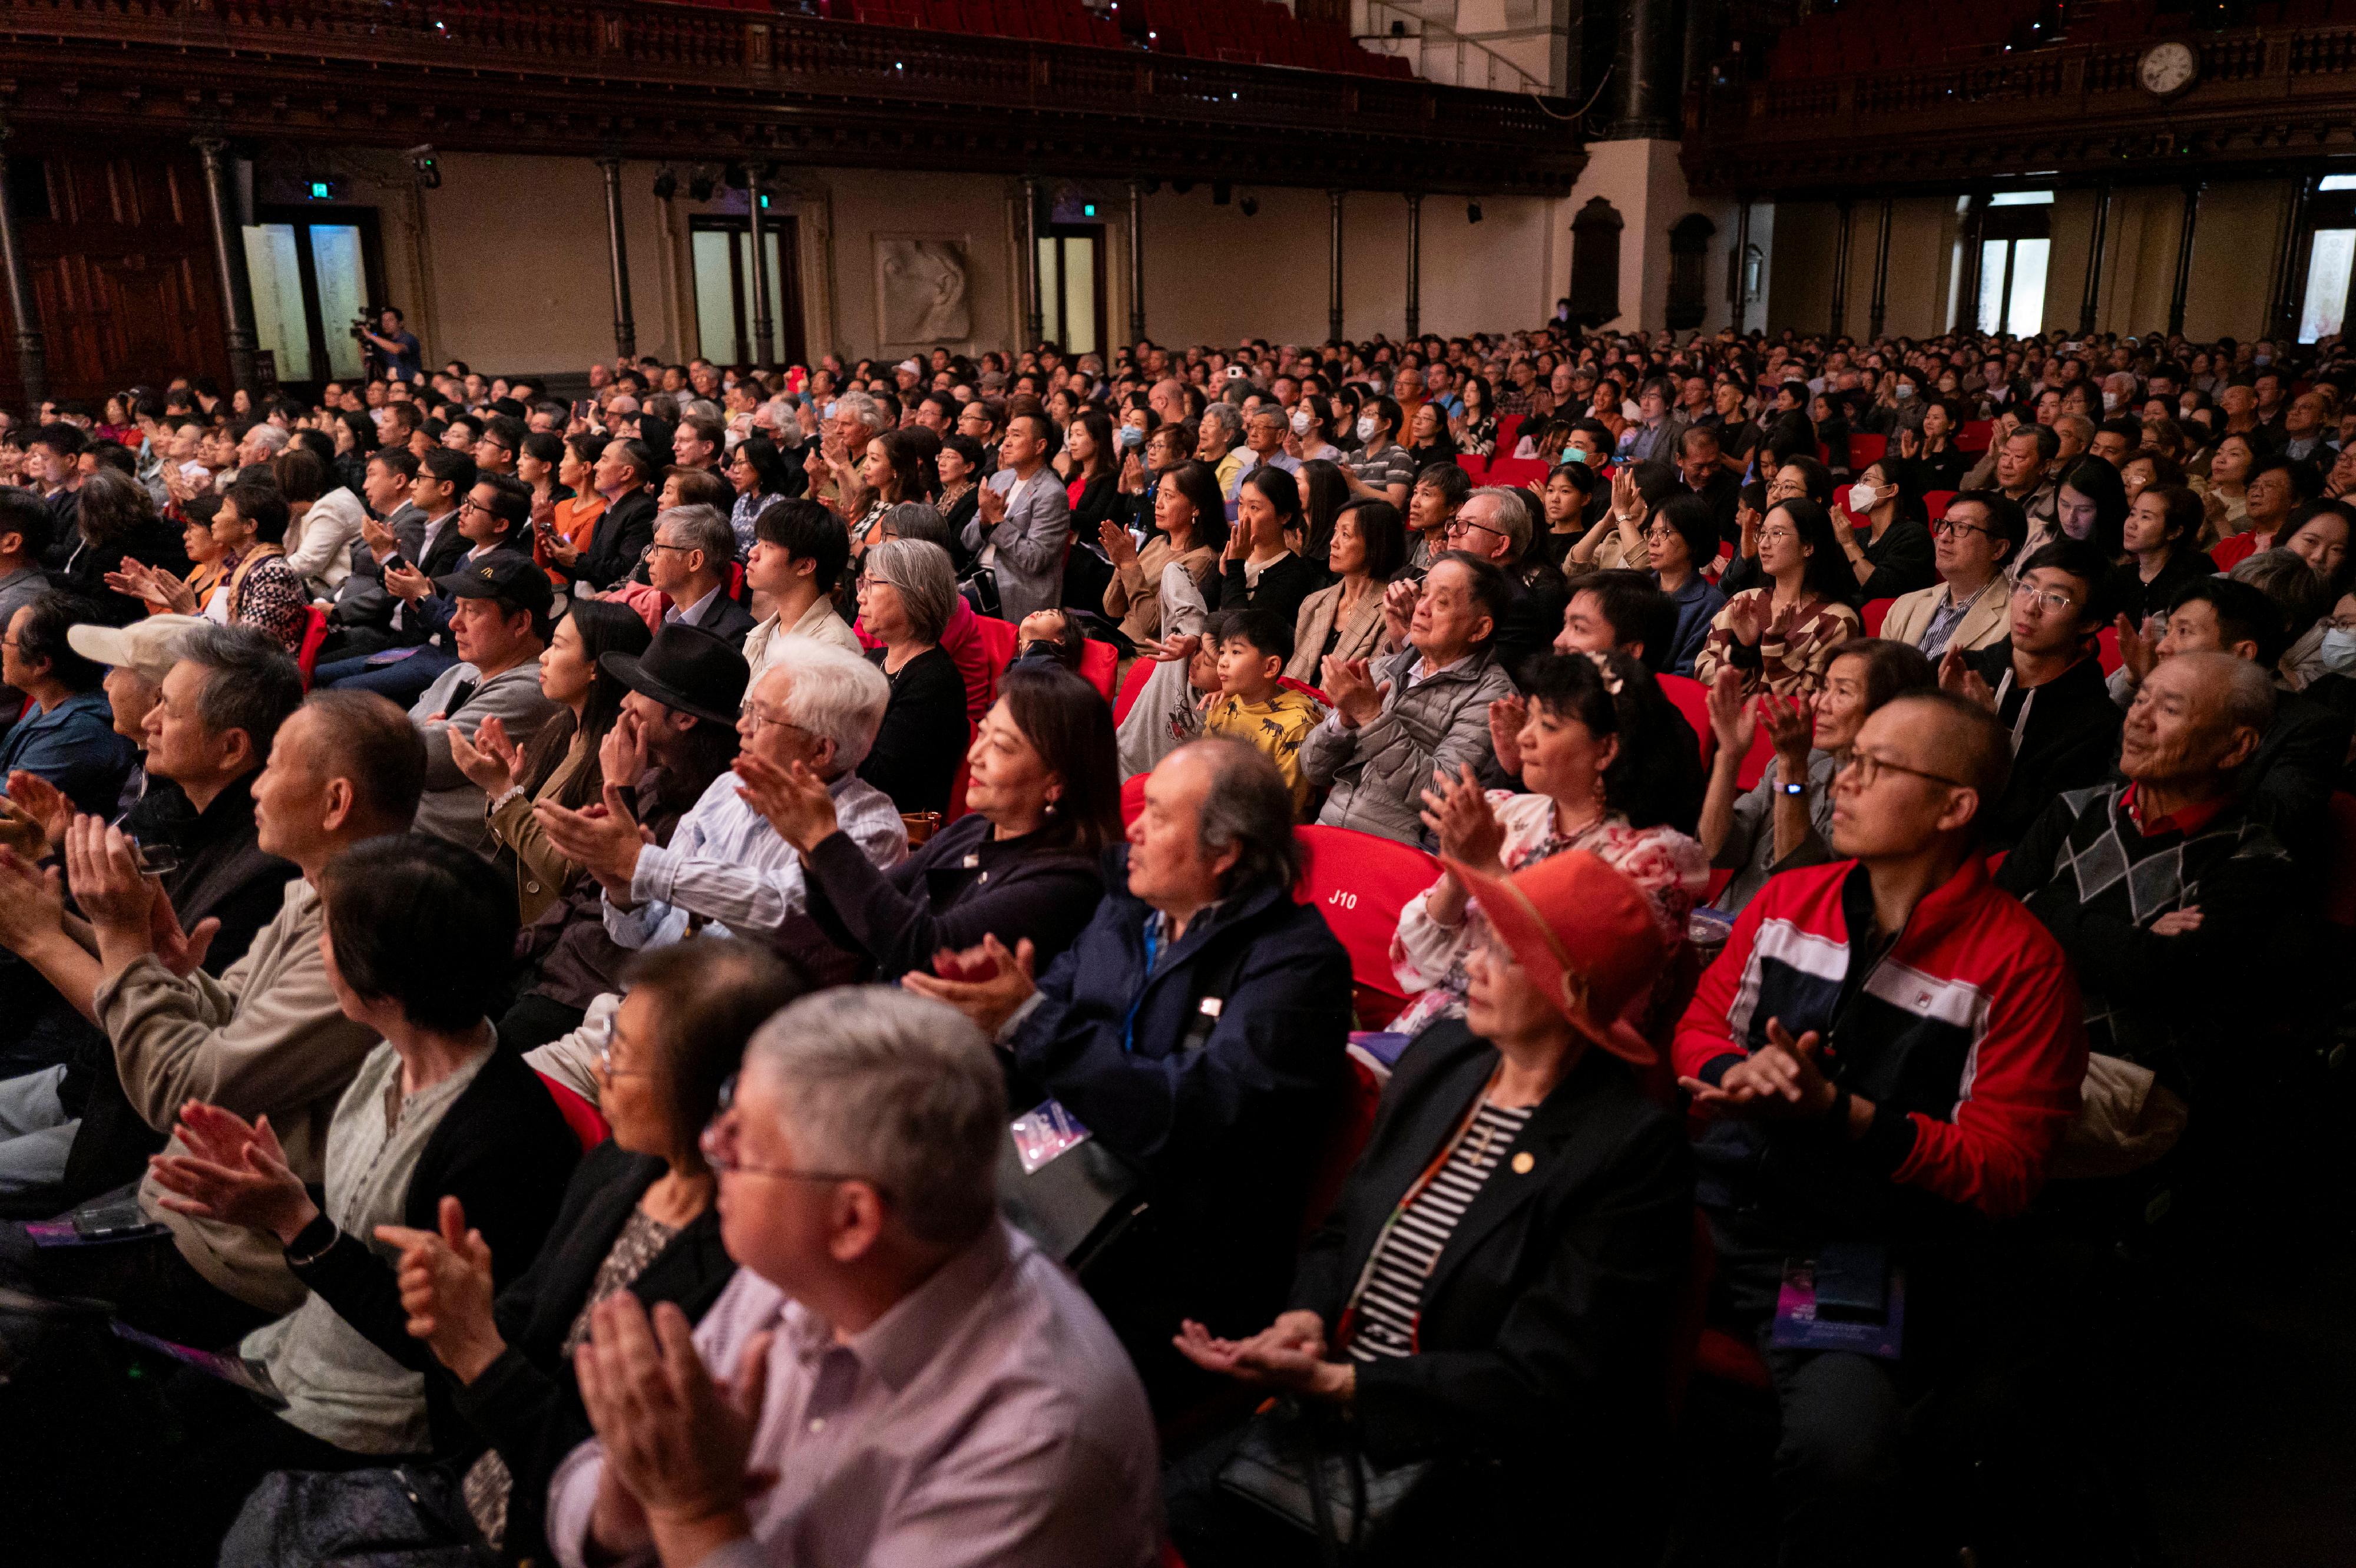 The Hong Kong Economic and Trade Office, Sydney is supporting the Hong Kong Chinese Orchestra in its staging of three music concerts in Australia to promote traditional Chinese music and showcase the music talent of Hong Kong. The concert in Sydney was well received by the audience yesterday (December 21).